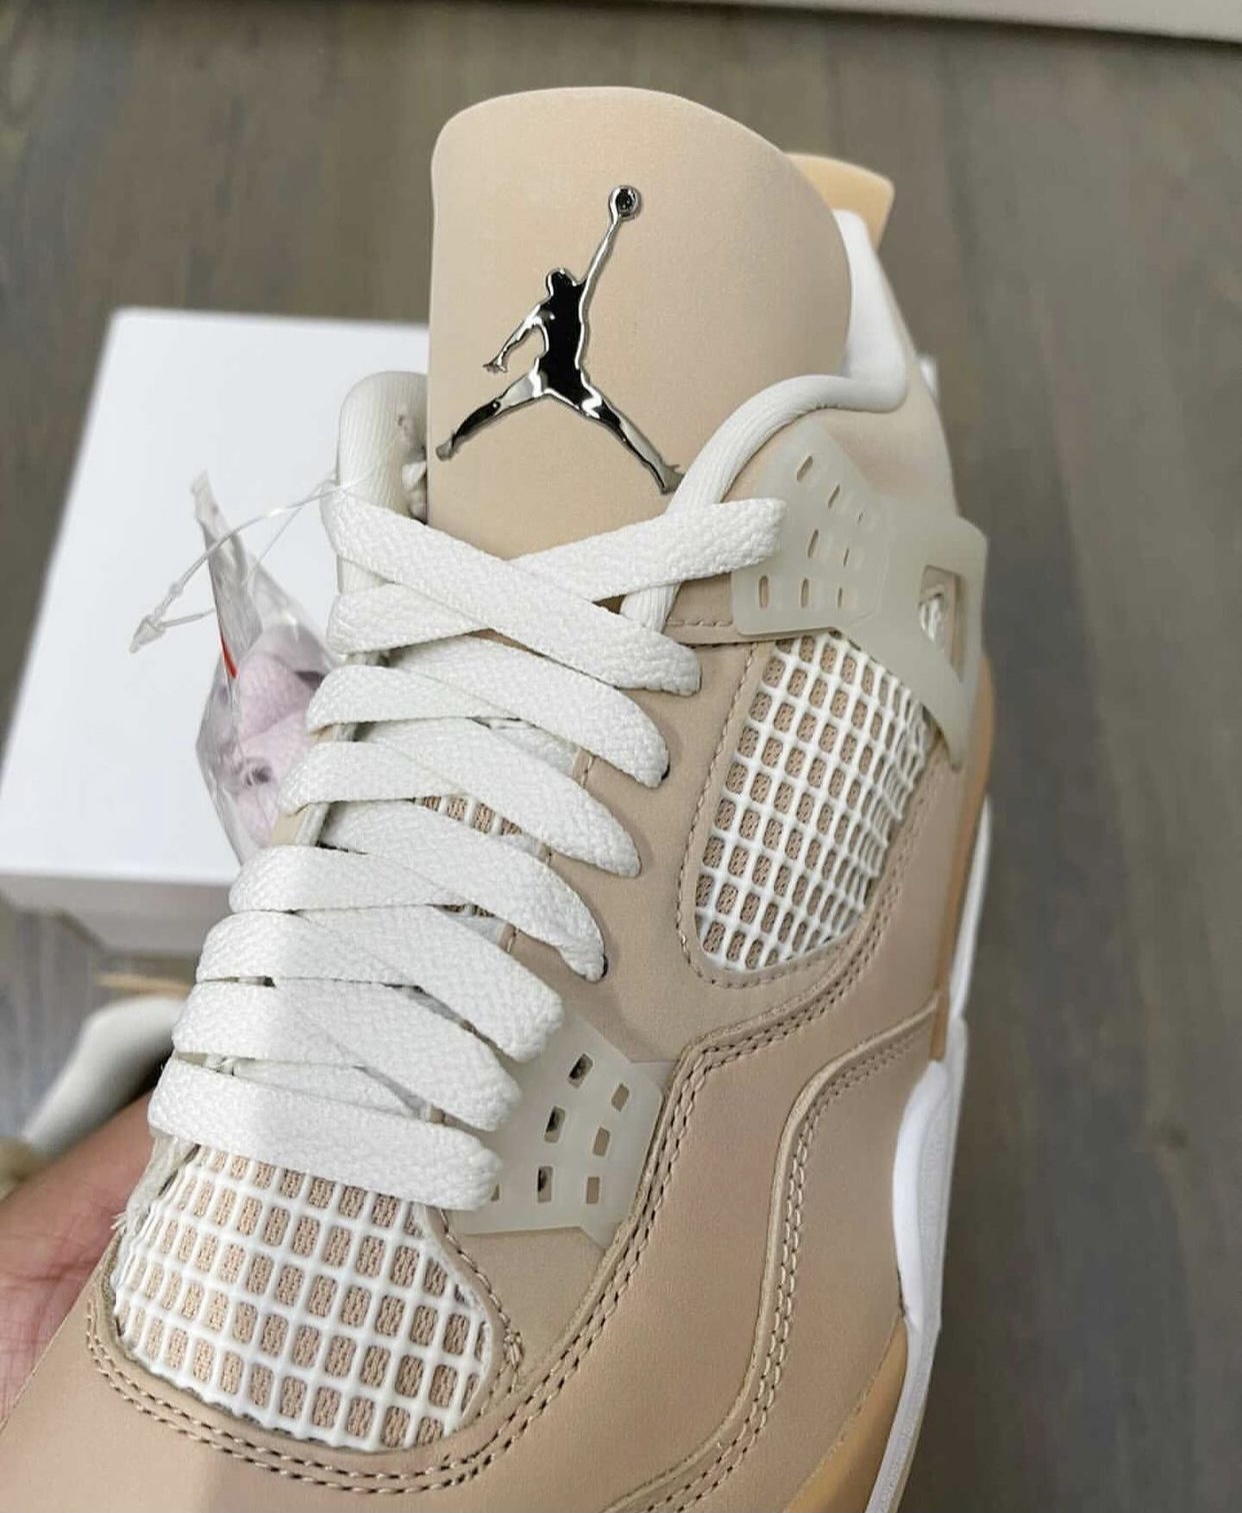 Keep scrolling to take a deep dive into some of the best Air Jordan 4s of all time Shimmer WMNS DJ0675-200 Release Date